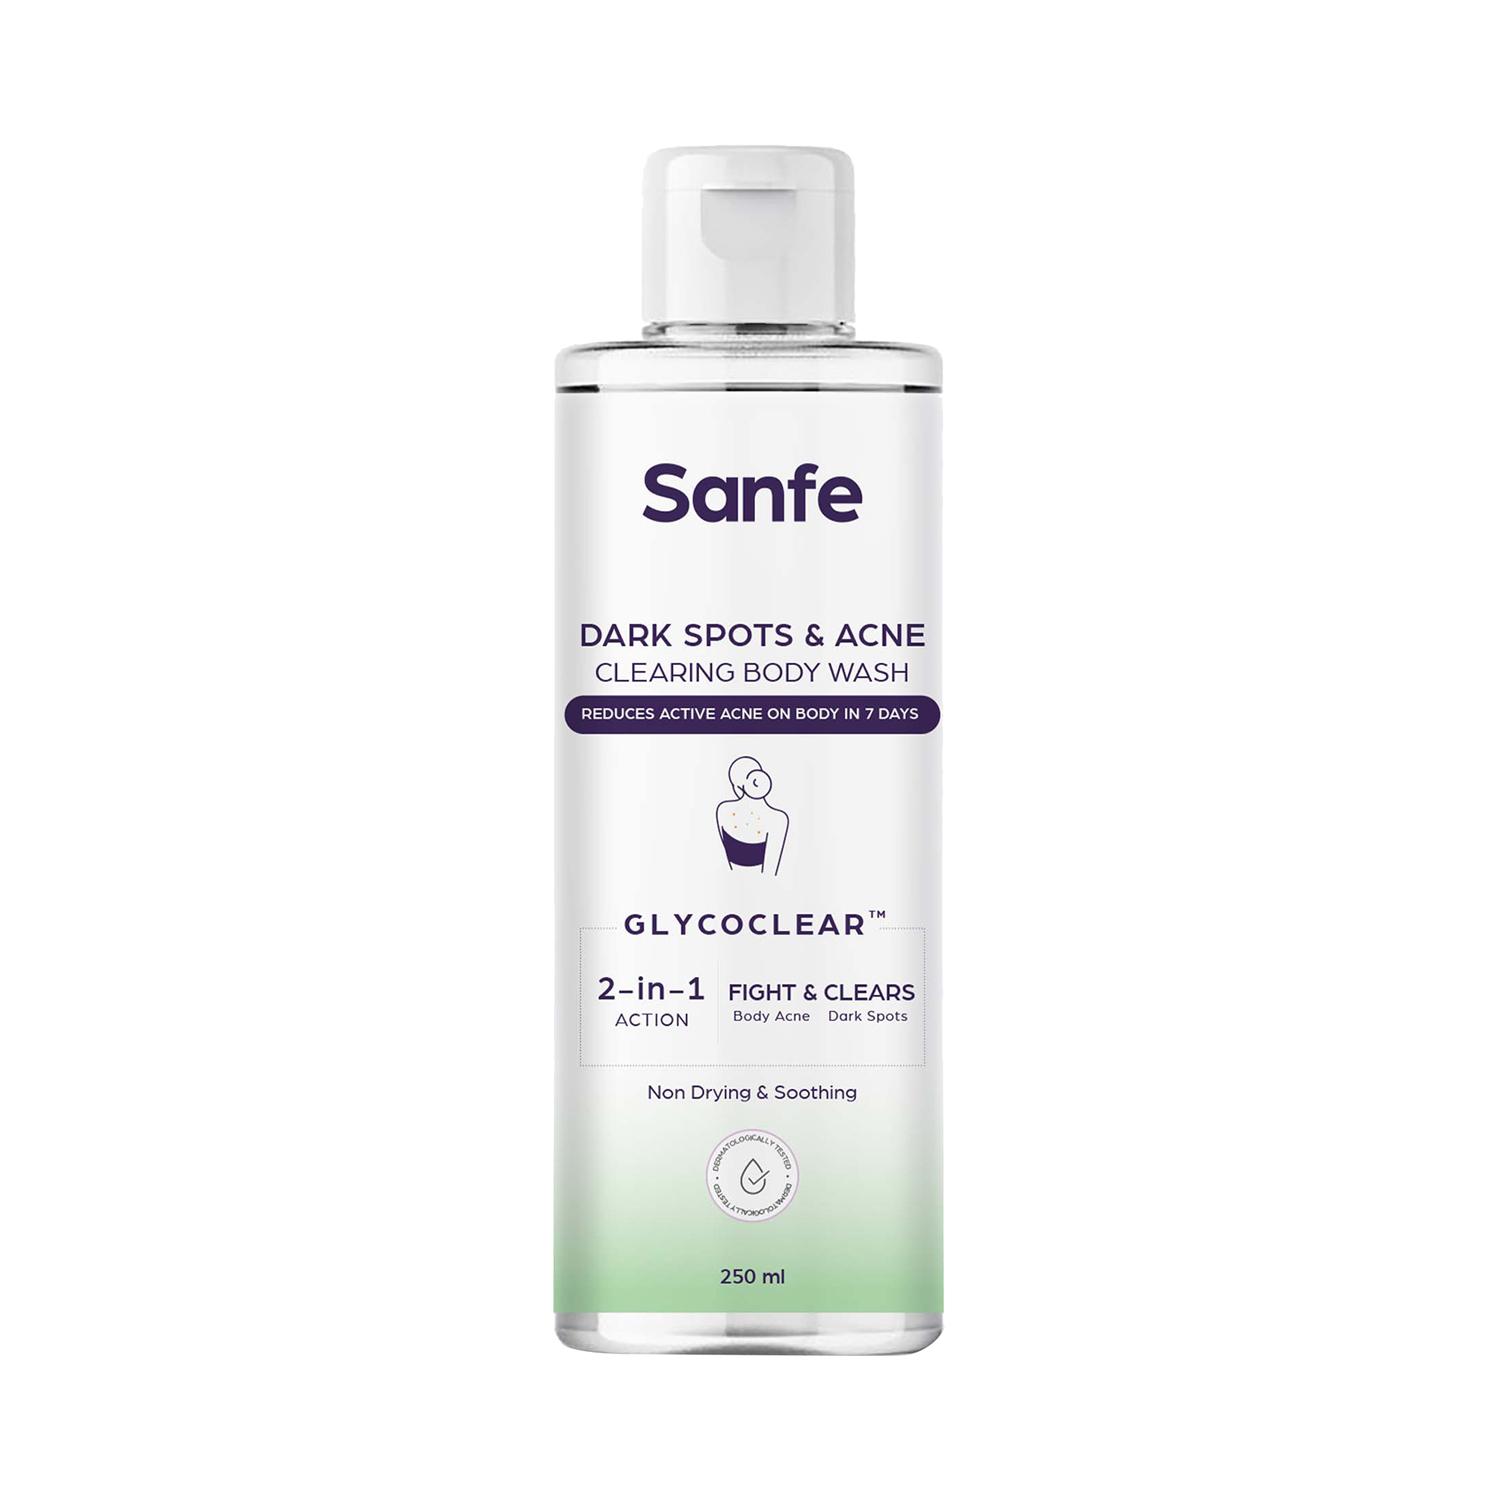 Sanfe Dark Spots and Acne Clearing Body Wash (250ml)